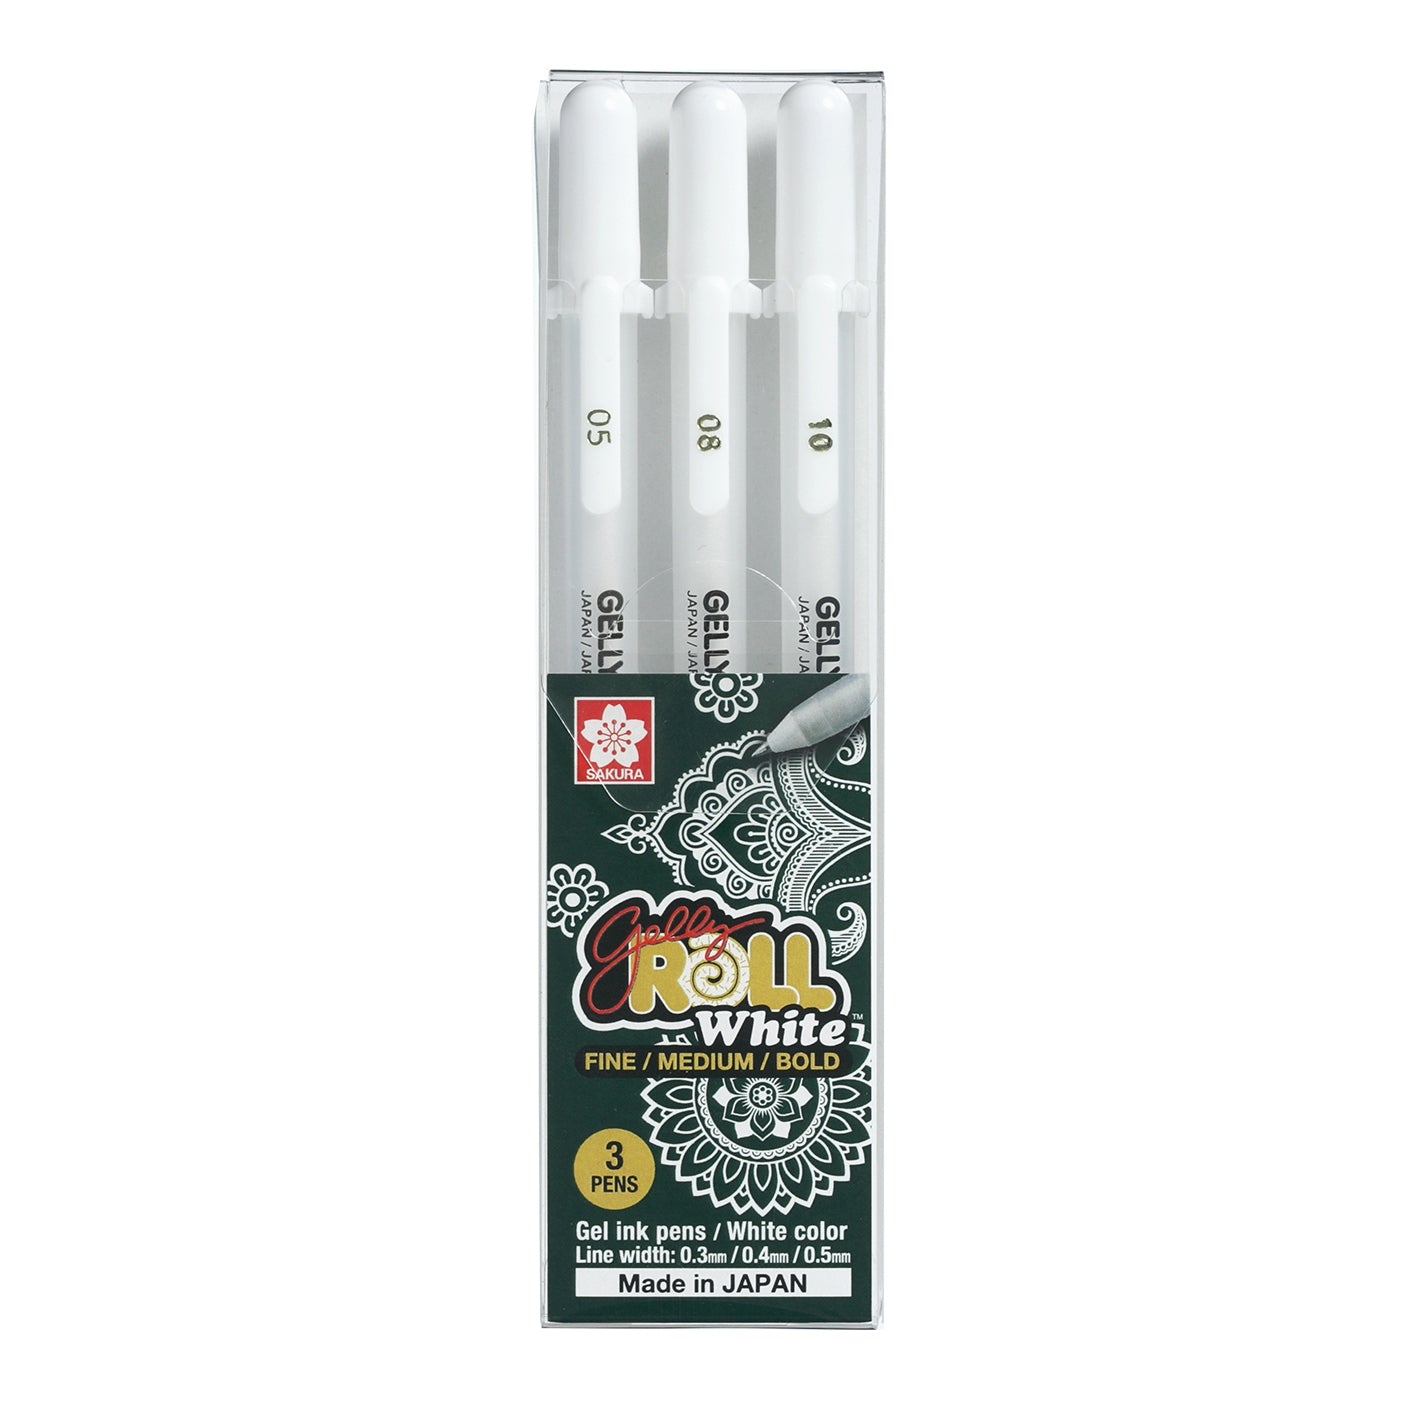 Gelly Roll White Set of 3